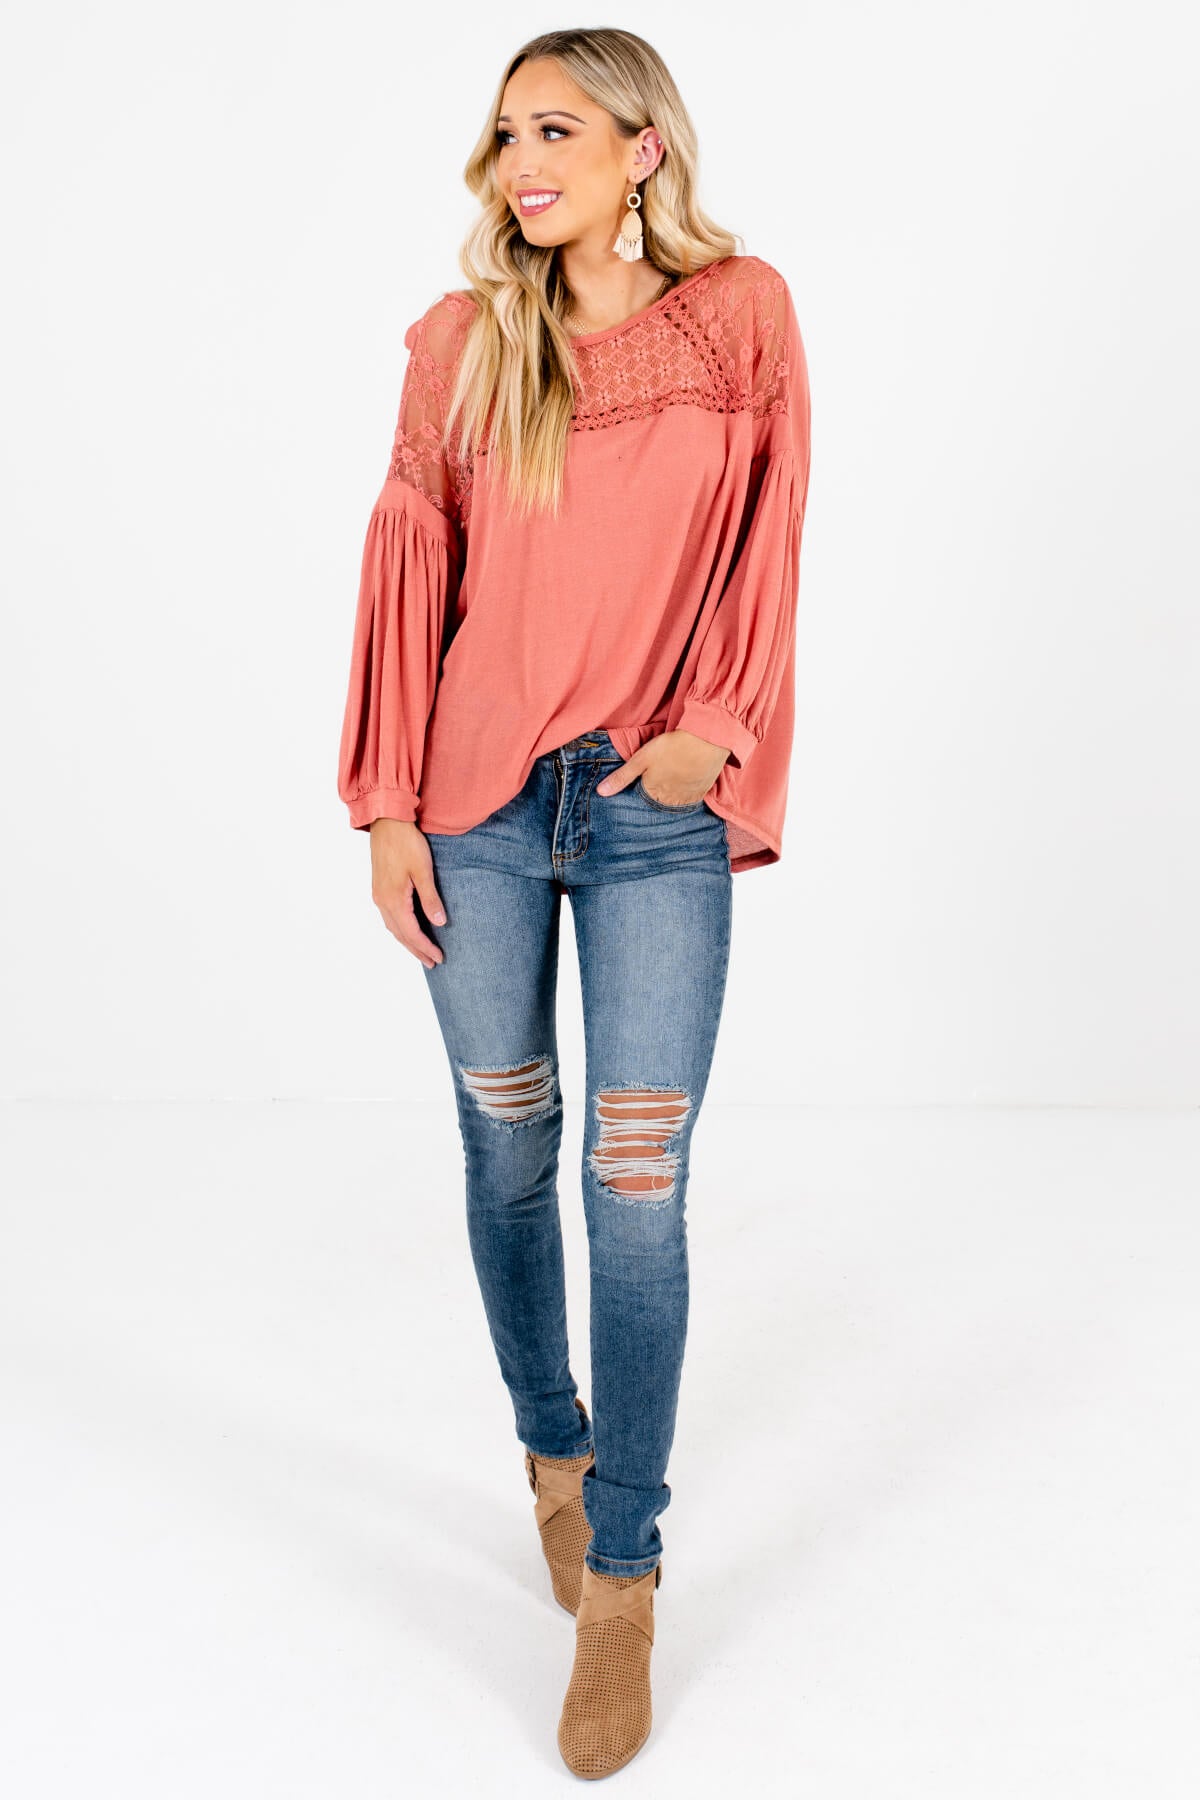 Women's Pink Boho Style Boutique Tops